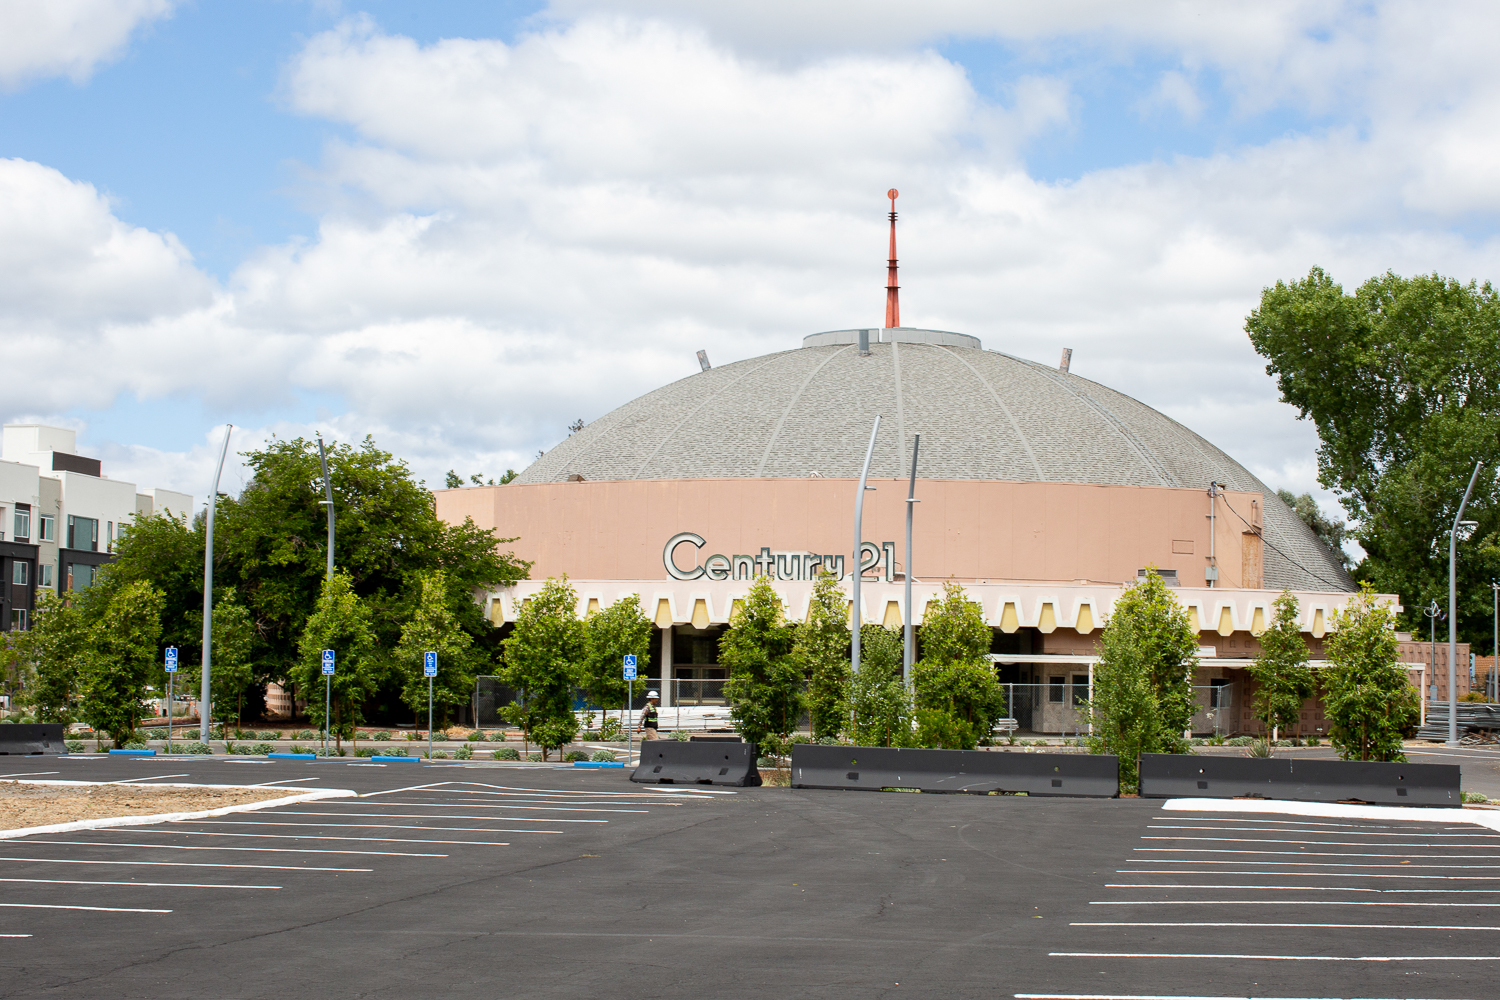 Century 21 dome at Santana West, image by Andrew Campbell Nelson